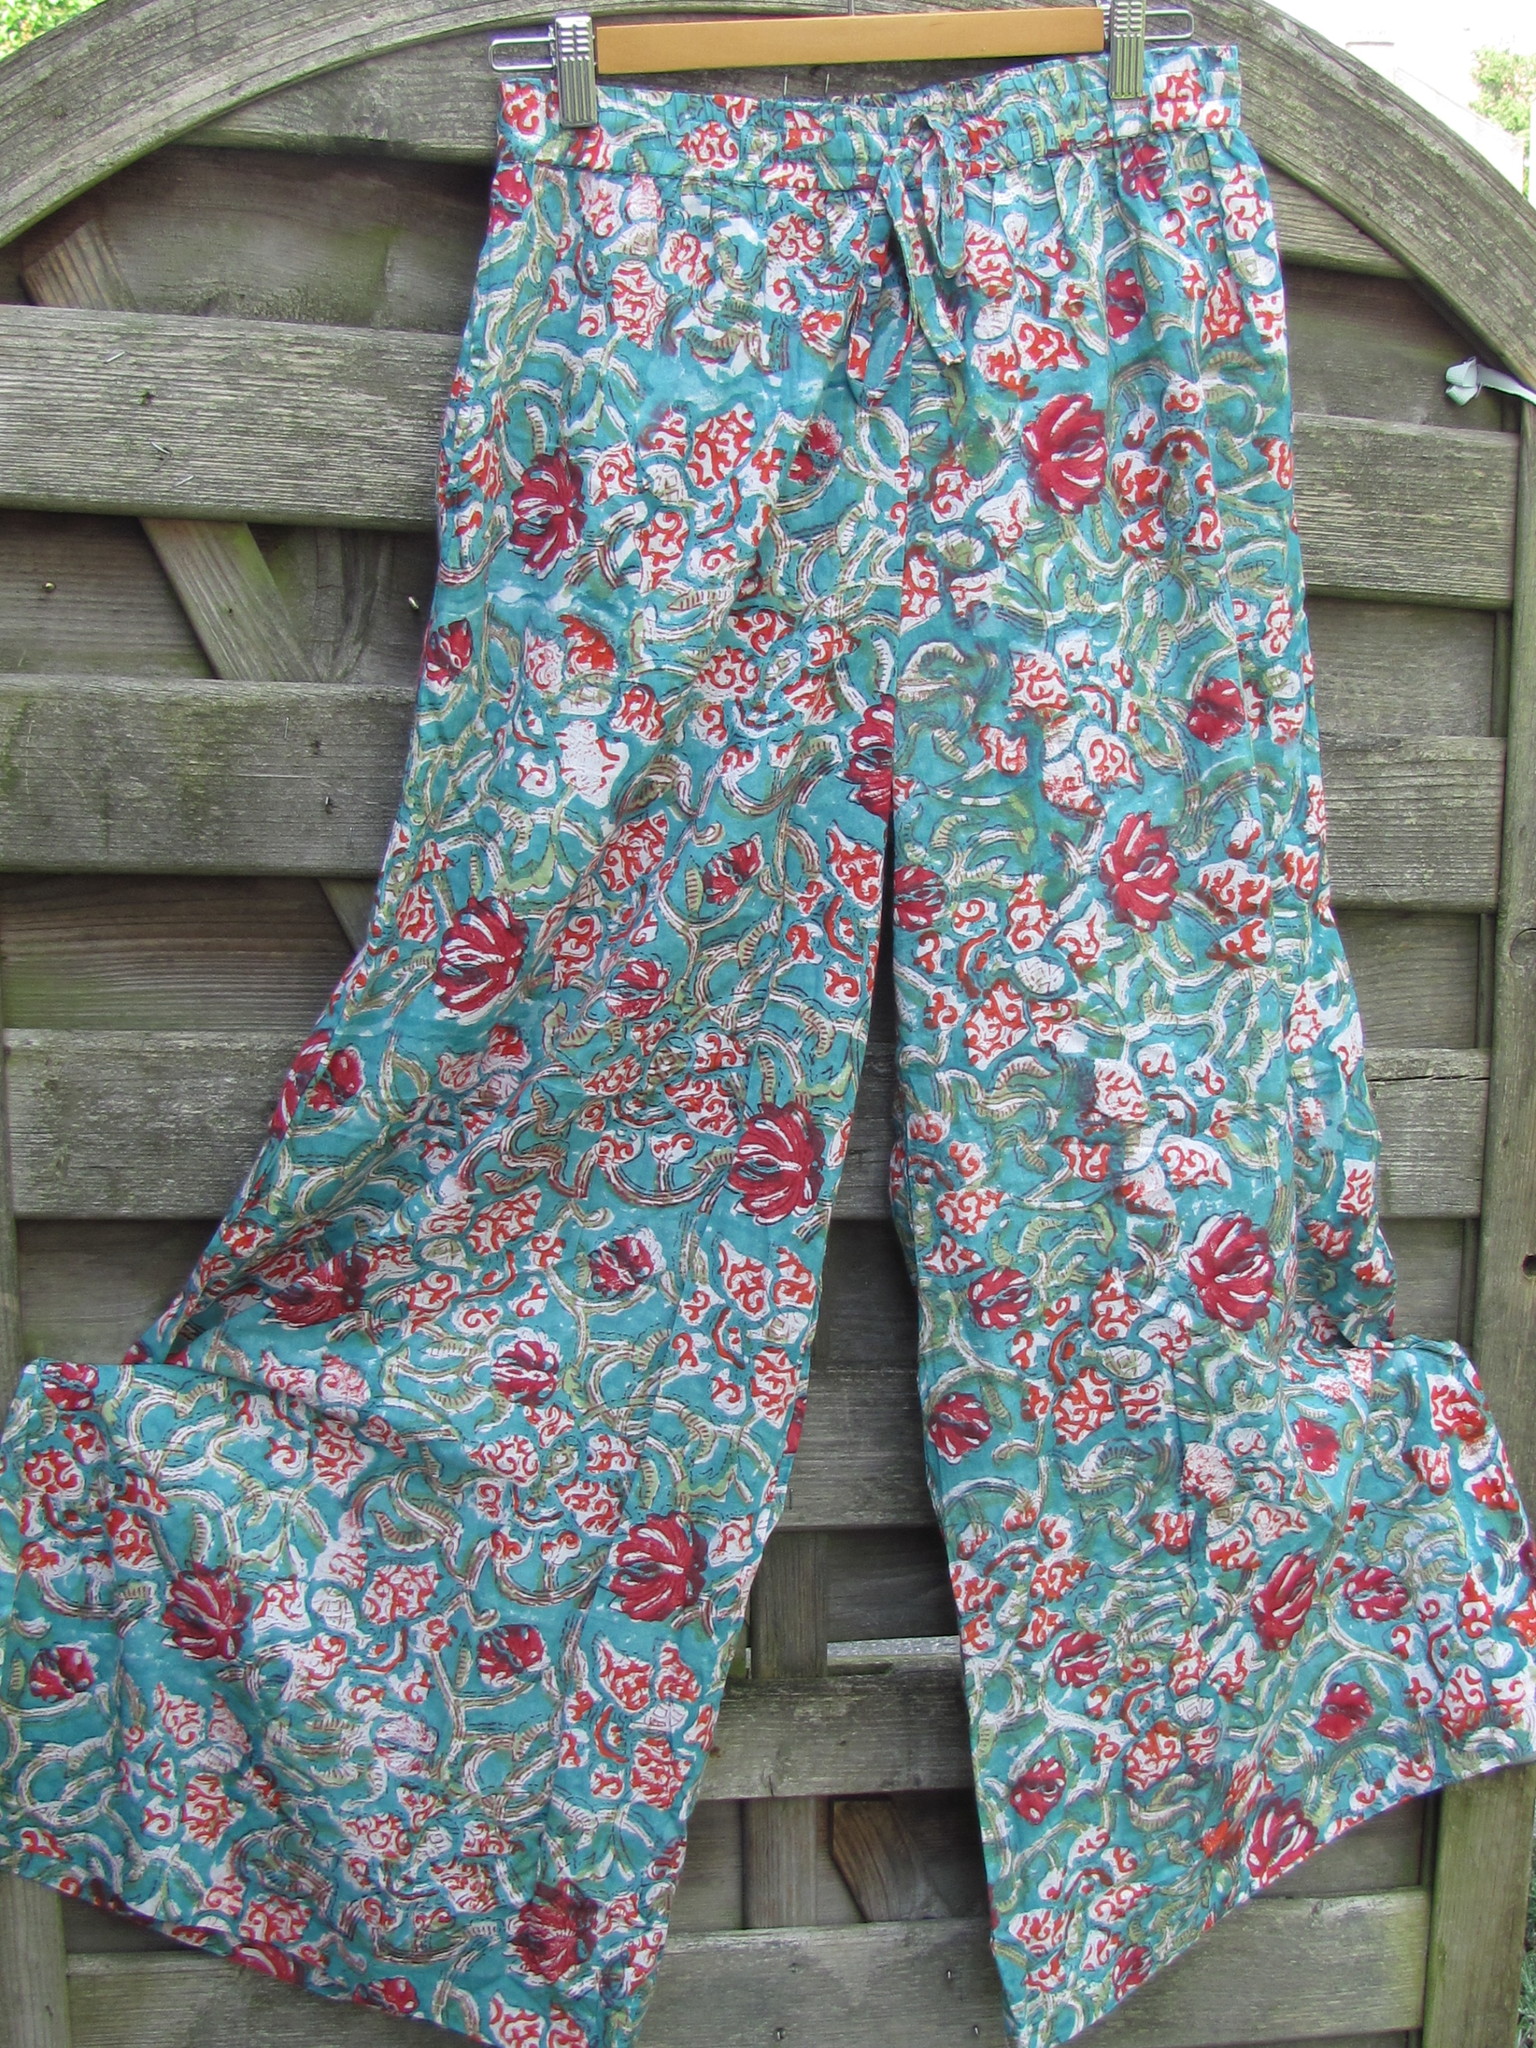 Pants wide legged, nice trouser  for summer casual wear